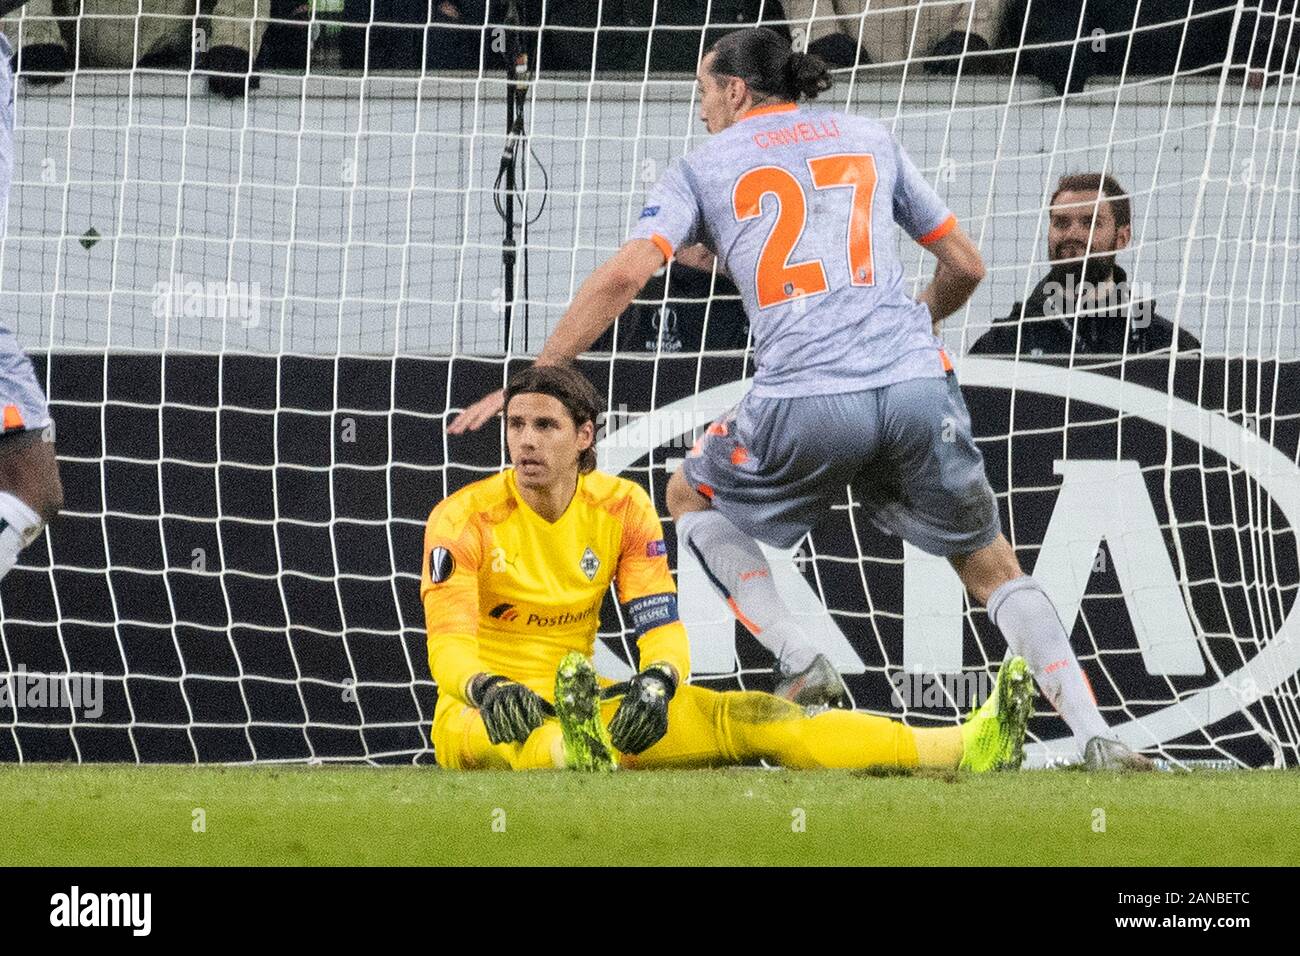 Shortly before the end of the game, Enzo CRIVELLI (Basak, r.) Scored the decisive goal for the 2-1 versus goalwart Yann SOMMER (MG), who pitched (pitched), dejected, on the pitch; Soccer Europa League, group stage, group J, matchday 6, Borussia Monchengladbach (MG) - Istanbul Basaksehir FK (Basak) 1: 2, on 12.12.2019 in Borussia Monchengladbach/Germany. | usage worldwide Stock Photo